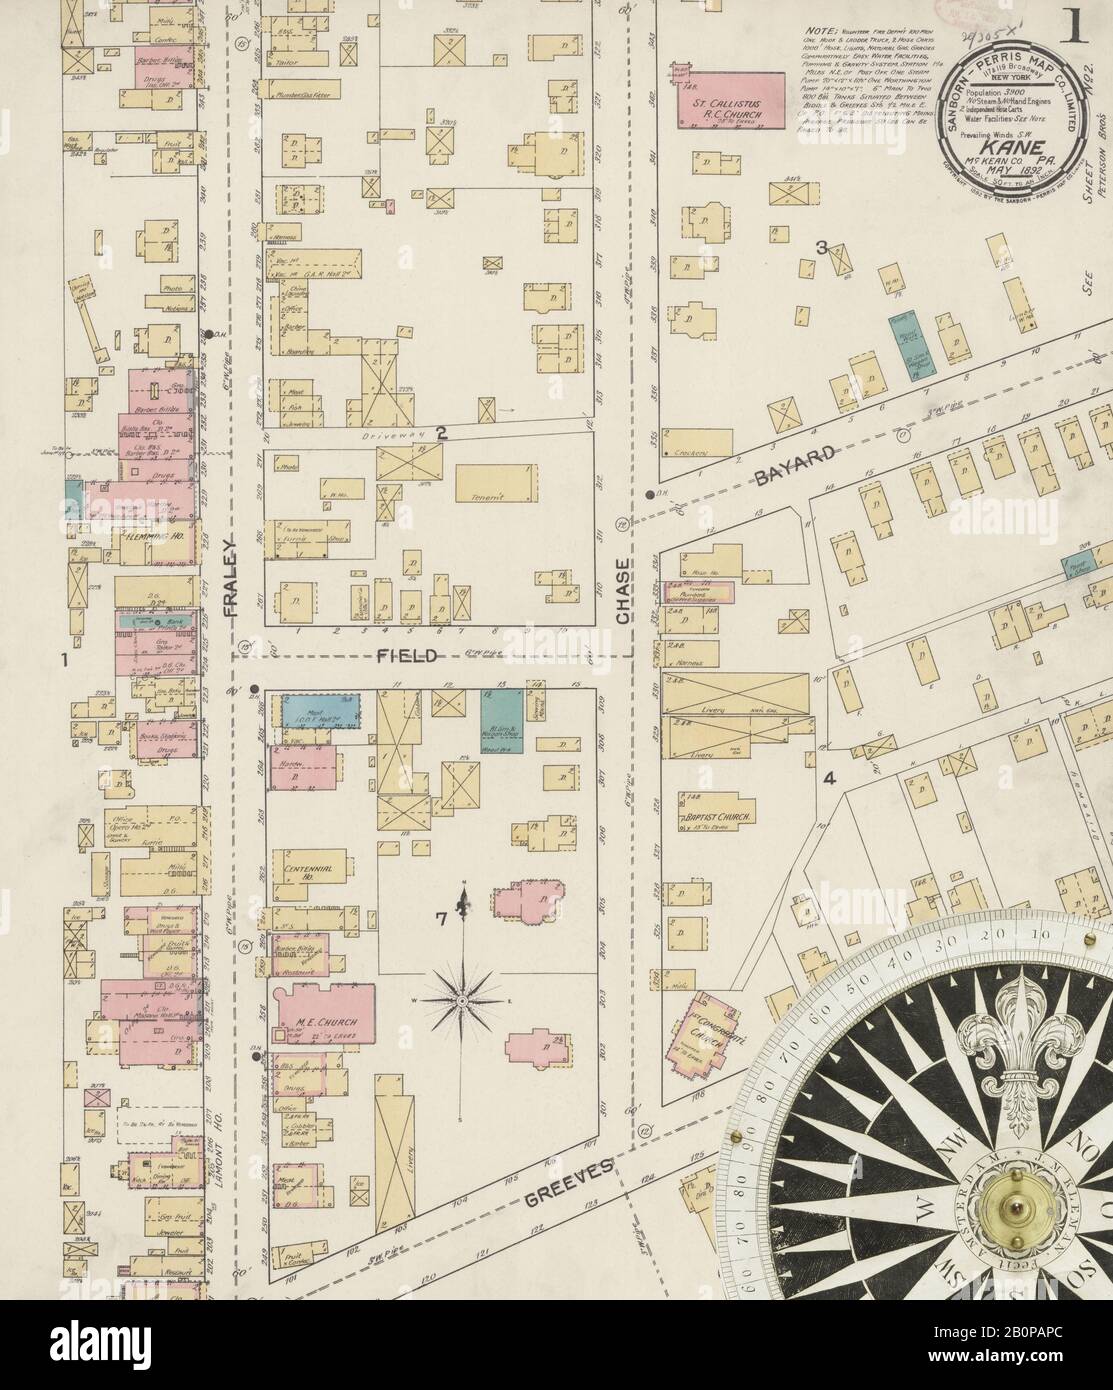 Image 1 of Sanborn Fire Insurance Map from Kane, McKean County, Pennsylvania. May 1892. 2 Sheet(s), America, street map with a Nineteenth Century compass Stock Photo